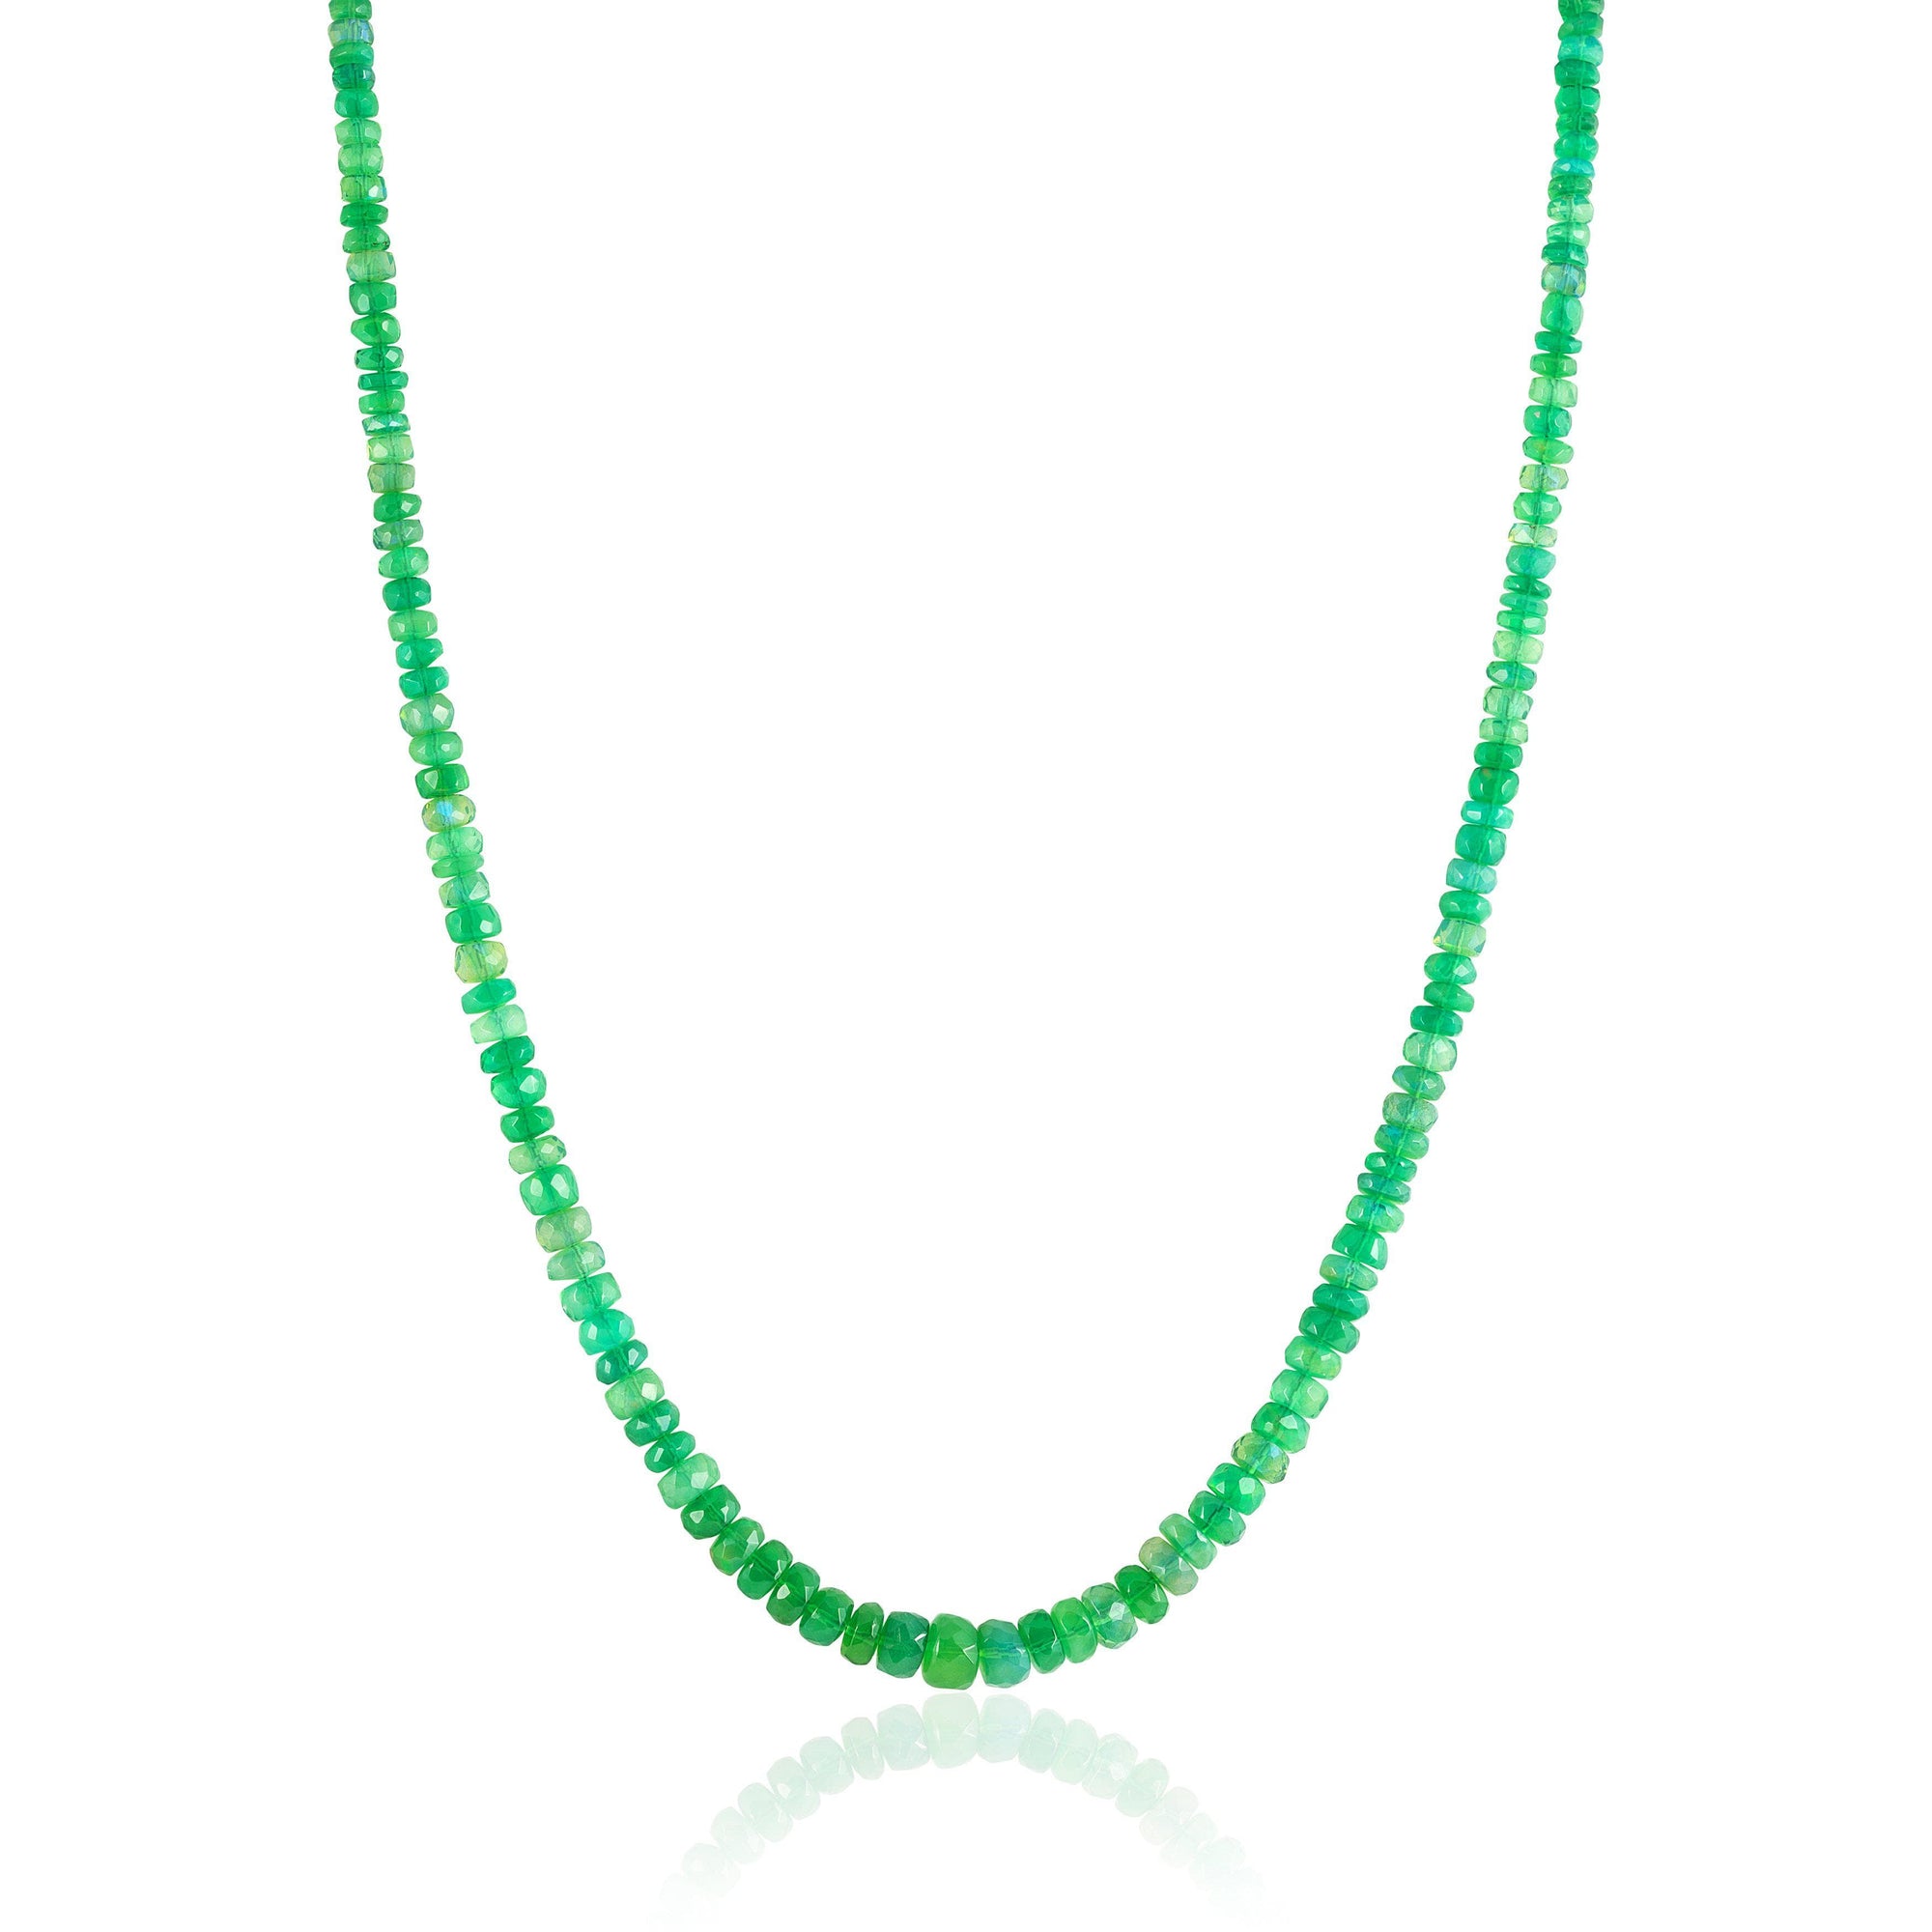 Green Ethiopian opal candy necklace